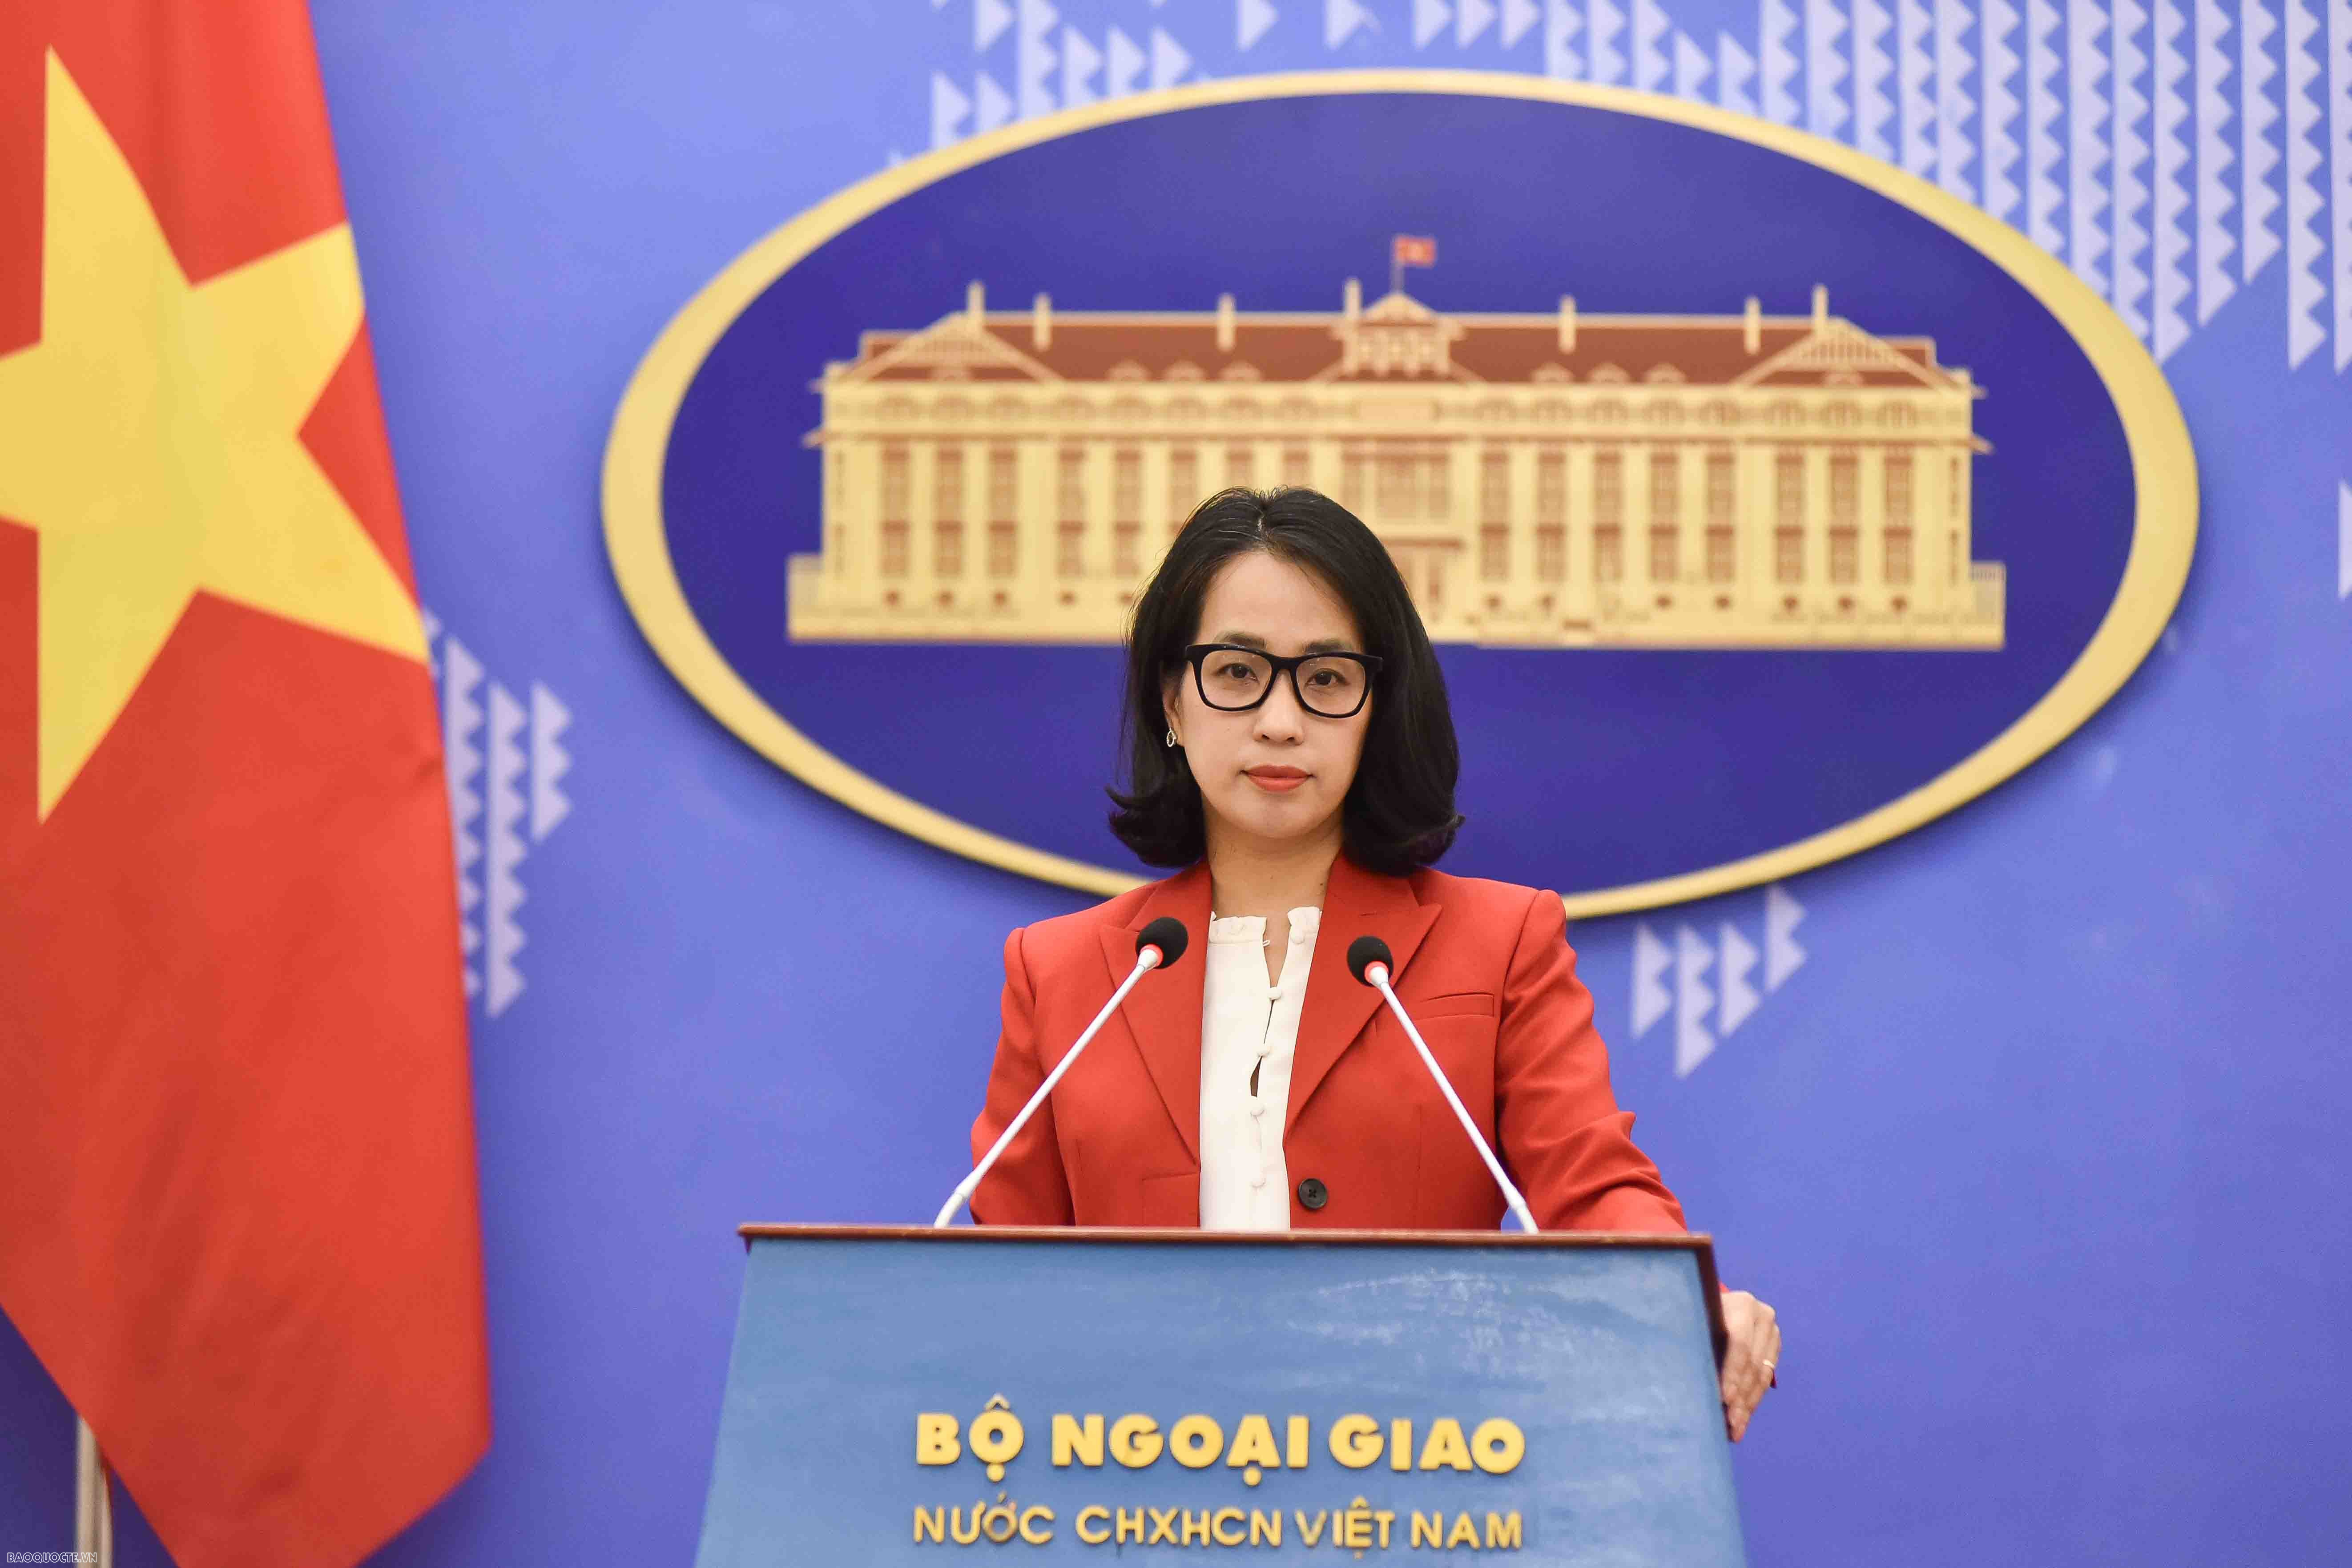 Vietnam had not received sufficient information on Funan Techno canal project: Spokesperson